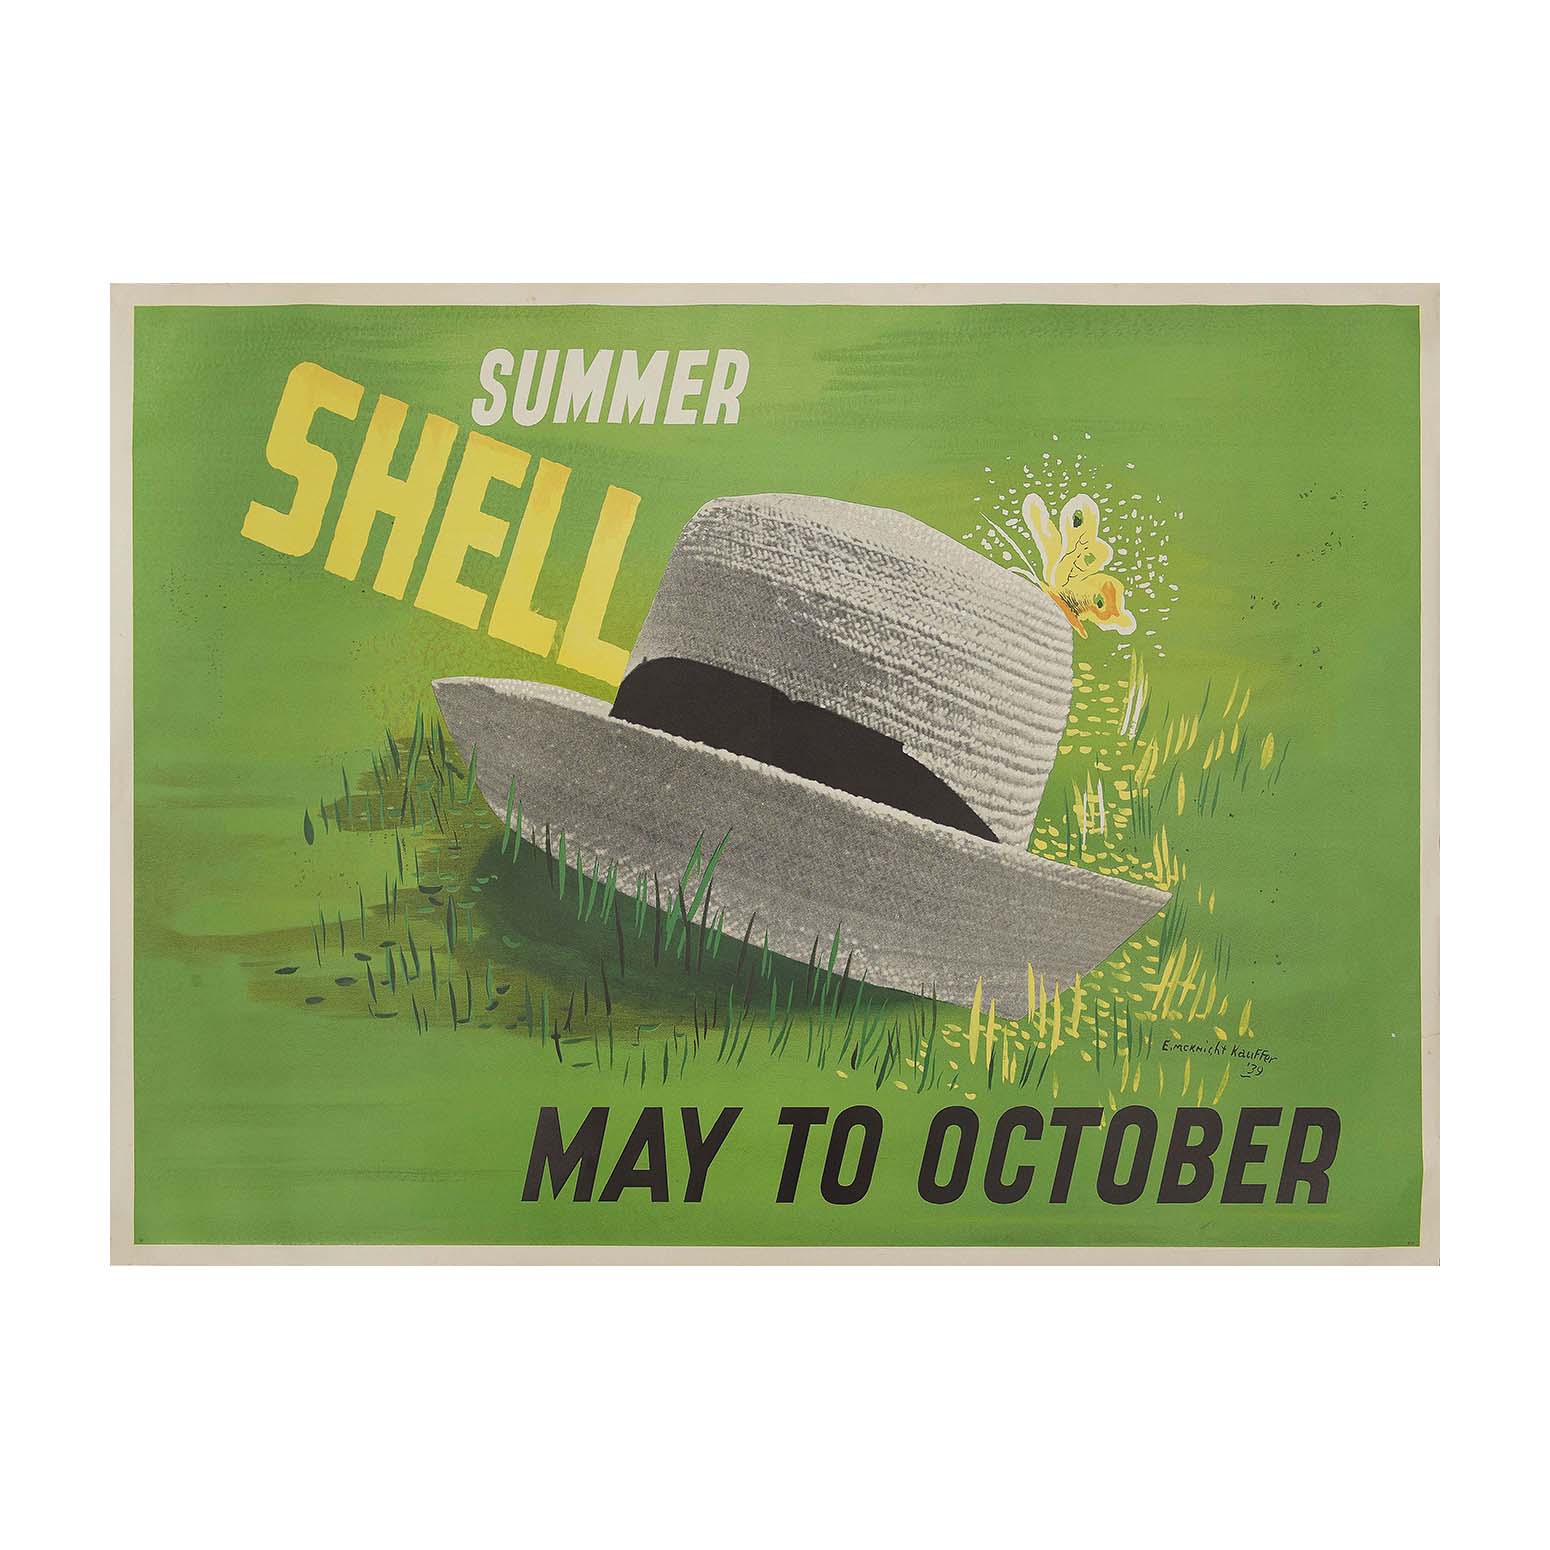 Original, antique, poster: Summer Shell from May to October, designed by Edward McKnight Kauffer, 1939. The photomontage design features a photograph of a summer hat superimposed with a graphic representation of a butterfly against a grassy background.